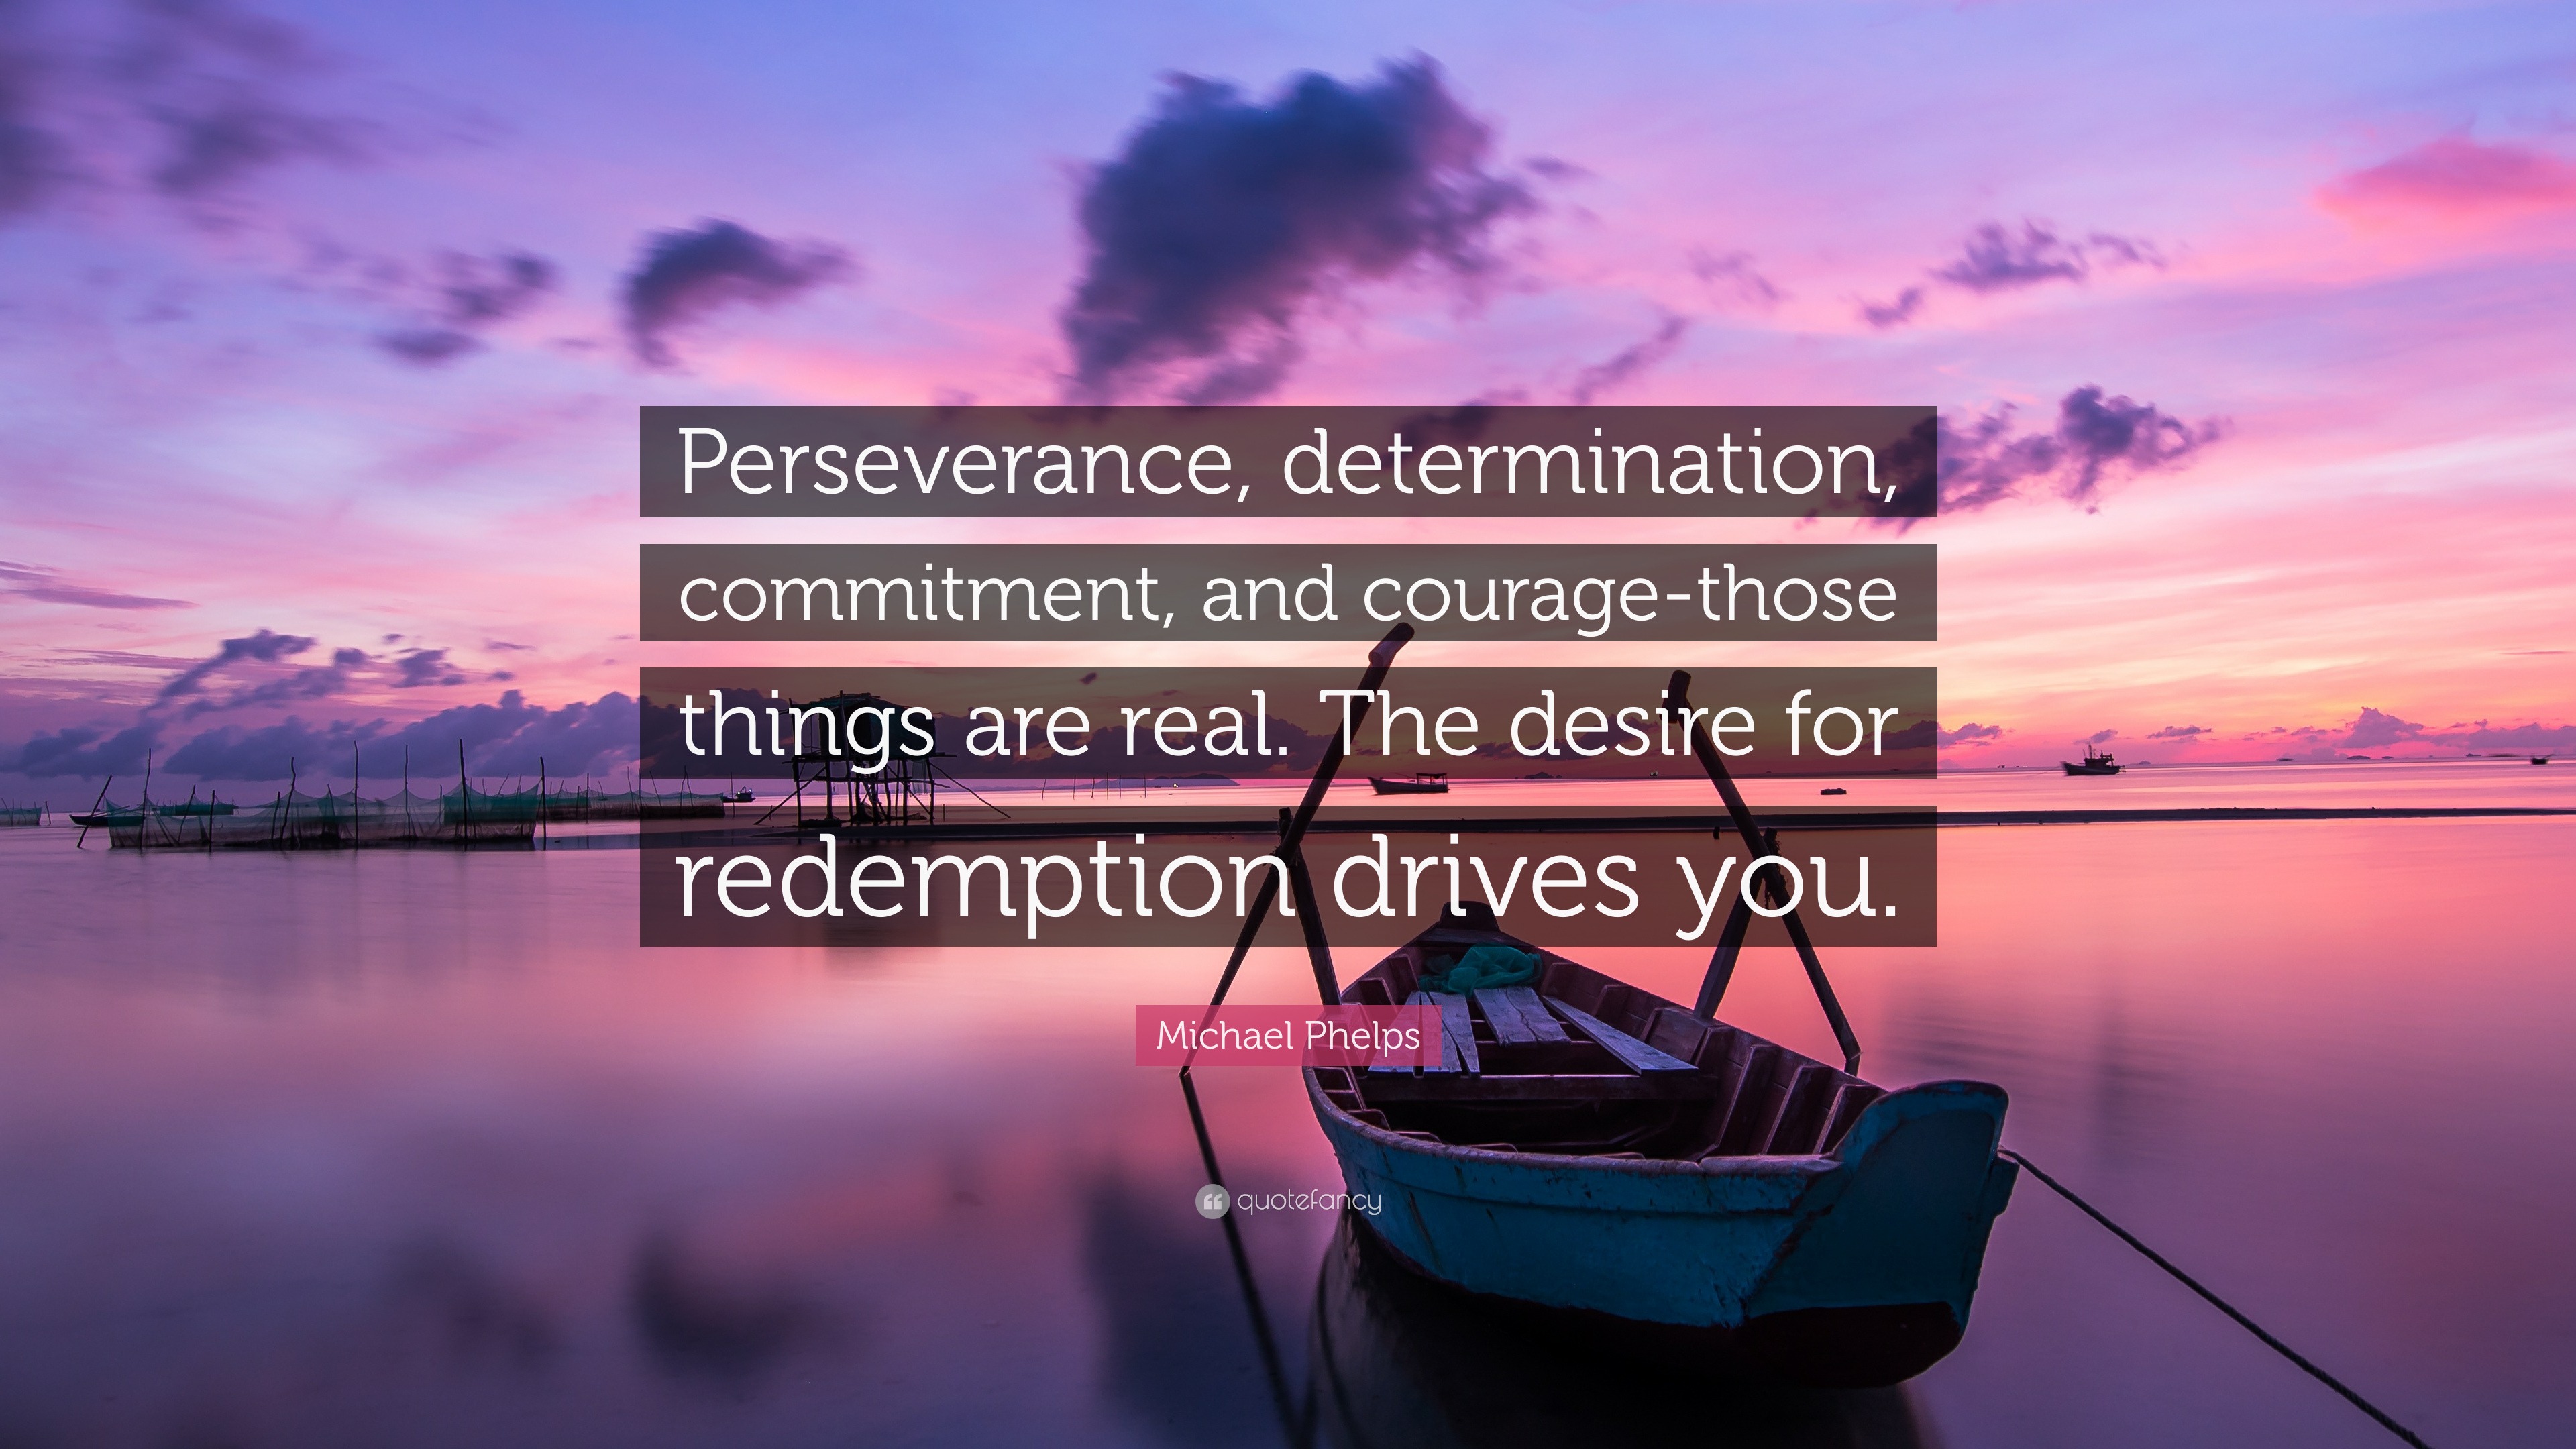 quotes on endurance and perseverance